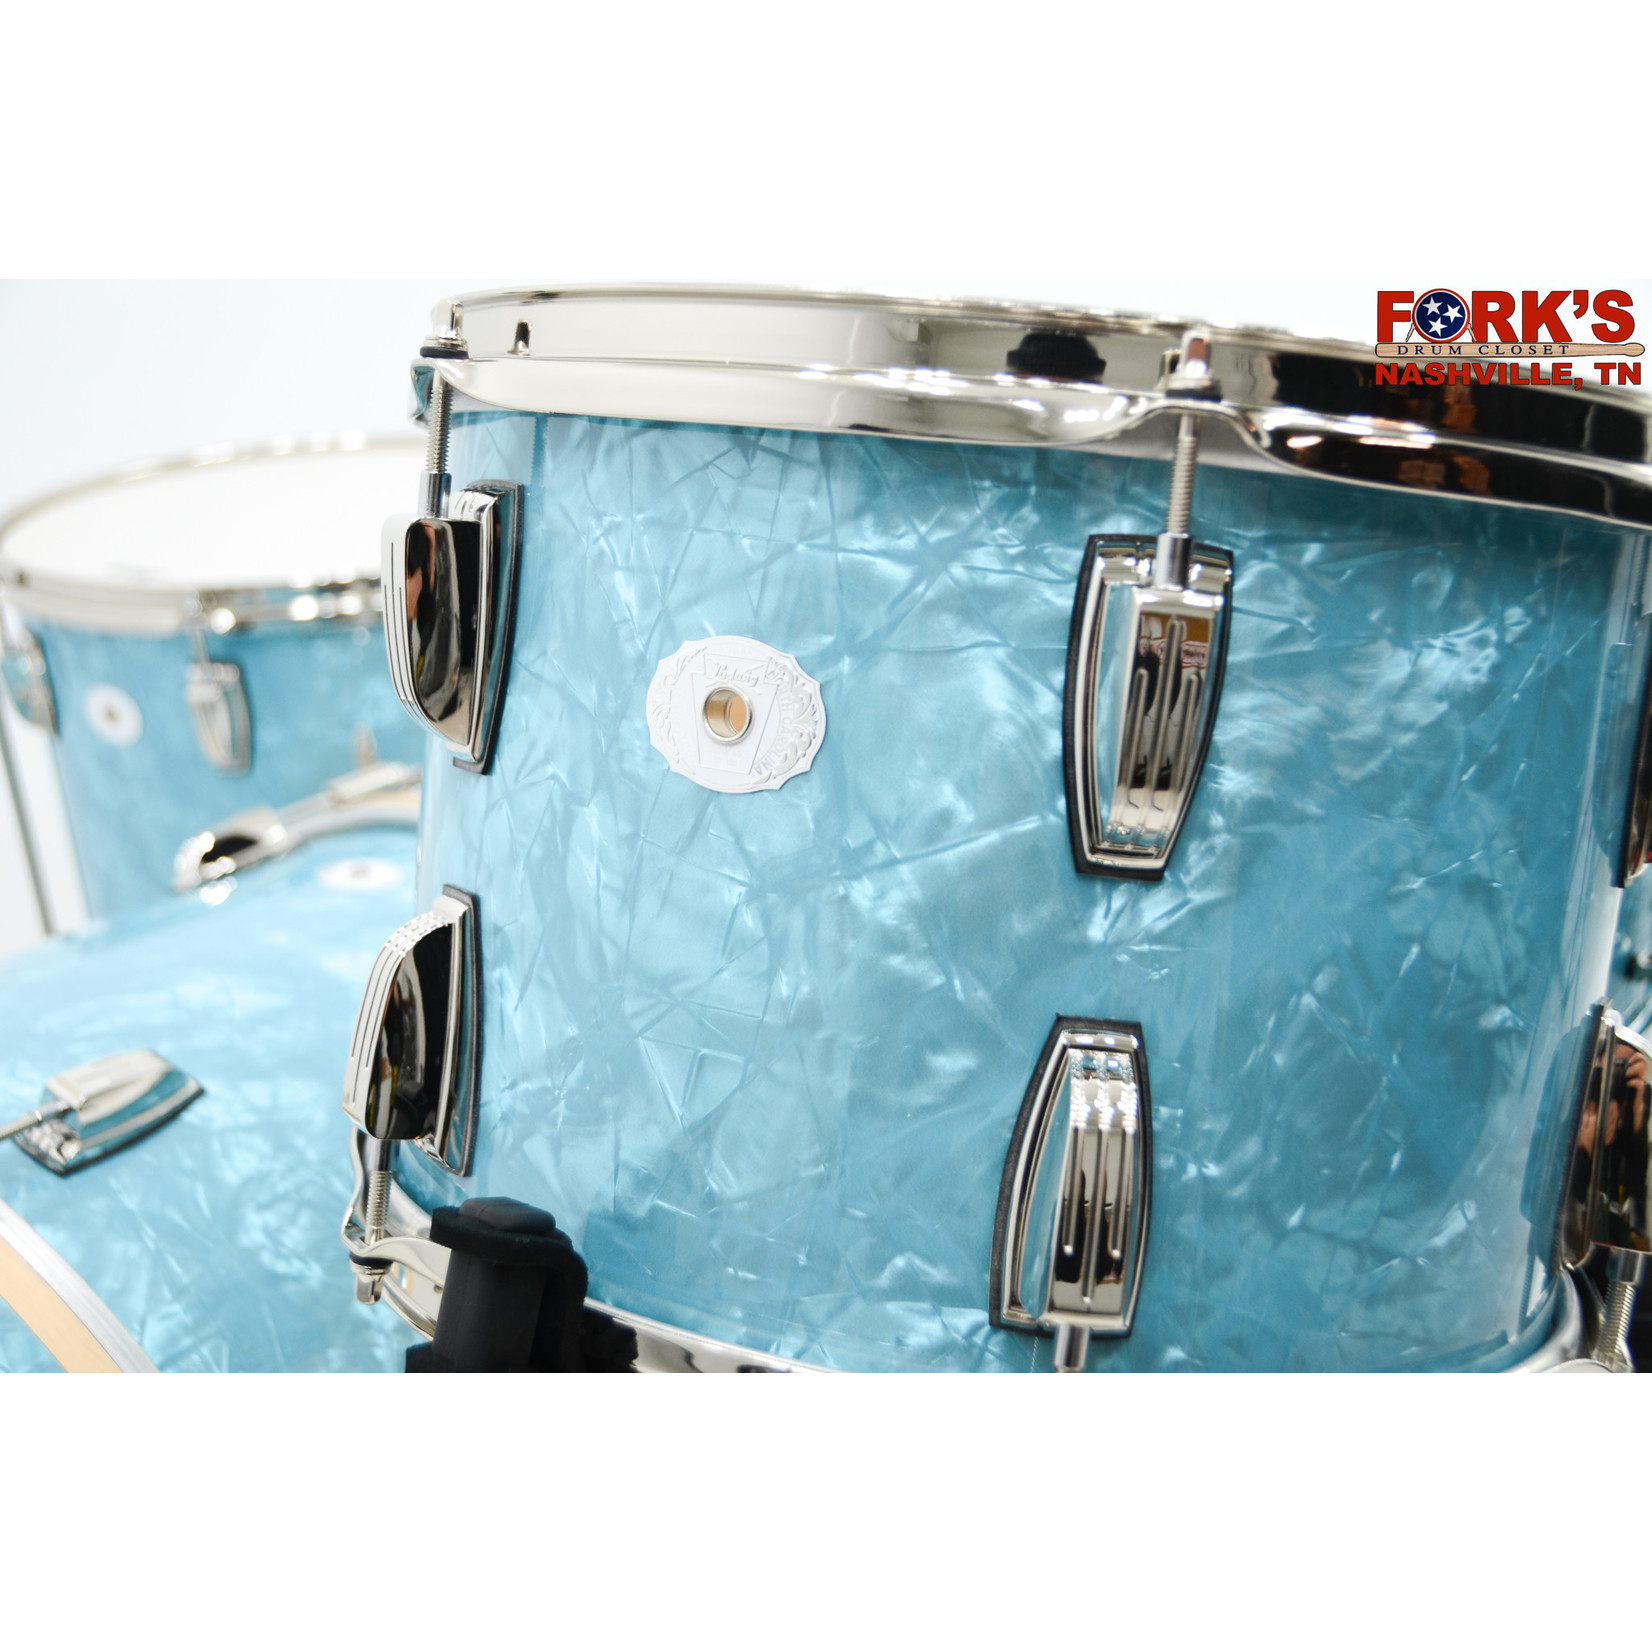 Ludwig Ludwig Classic Maple 4pc Drum Kit "Ice Blue Oyster" w/ Nickel Hardware